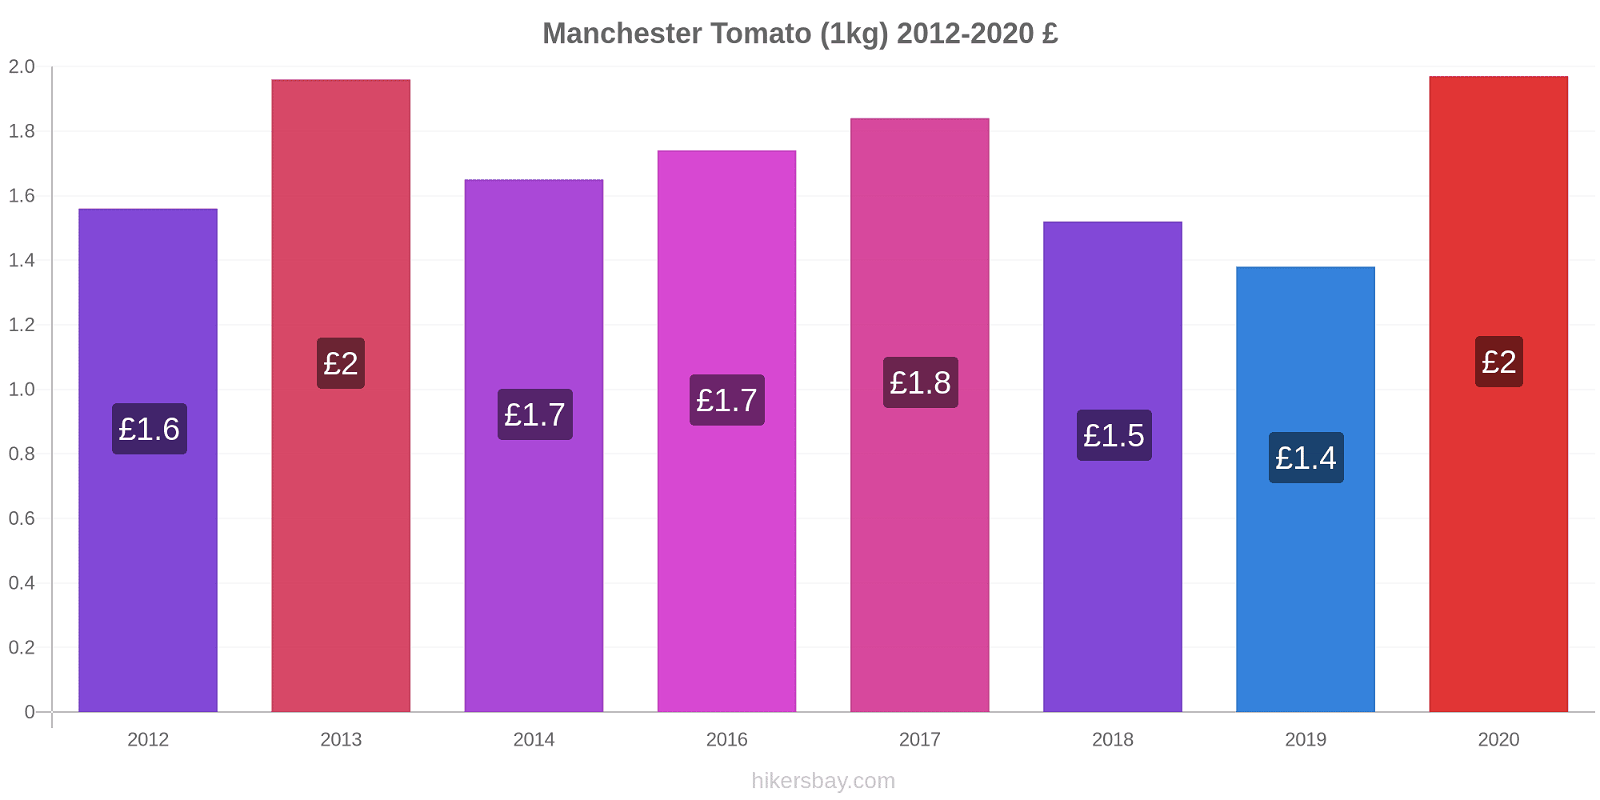 Manchester price changes Tomato (1kg) hikersbay.com